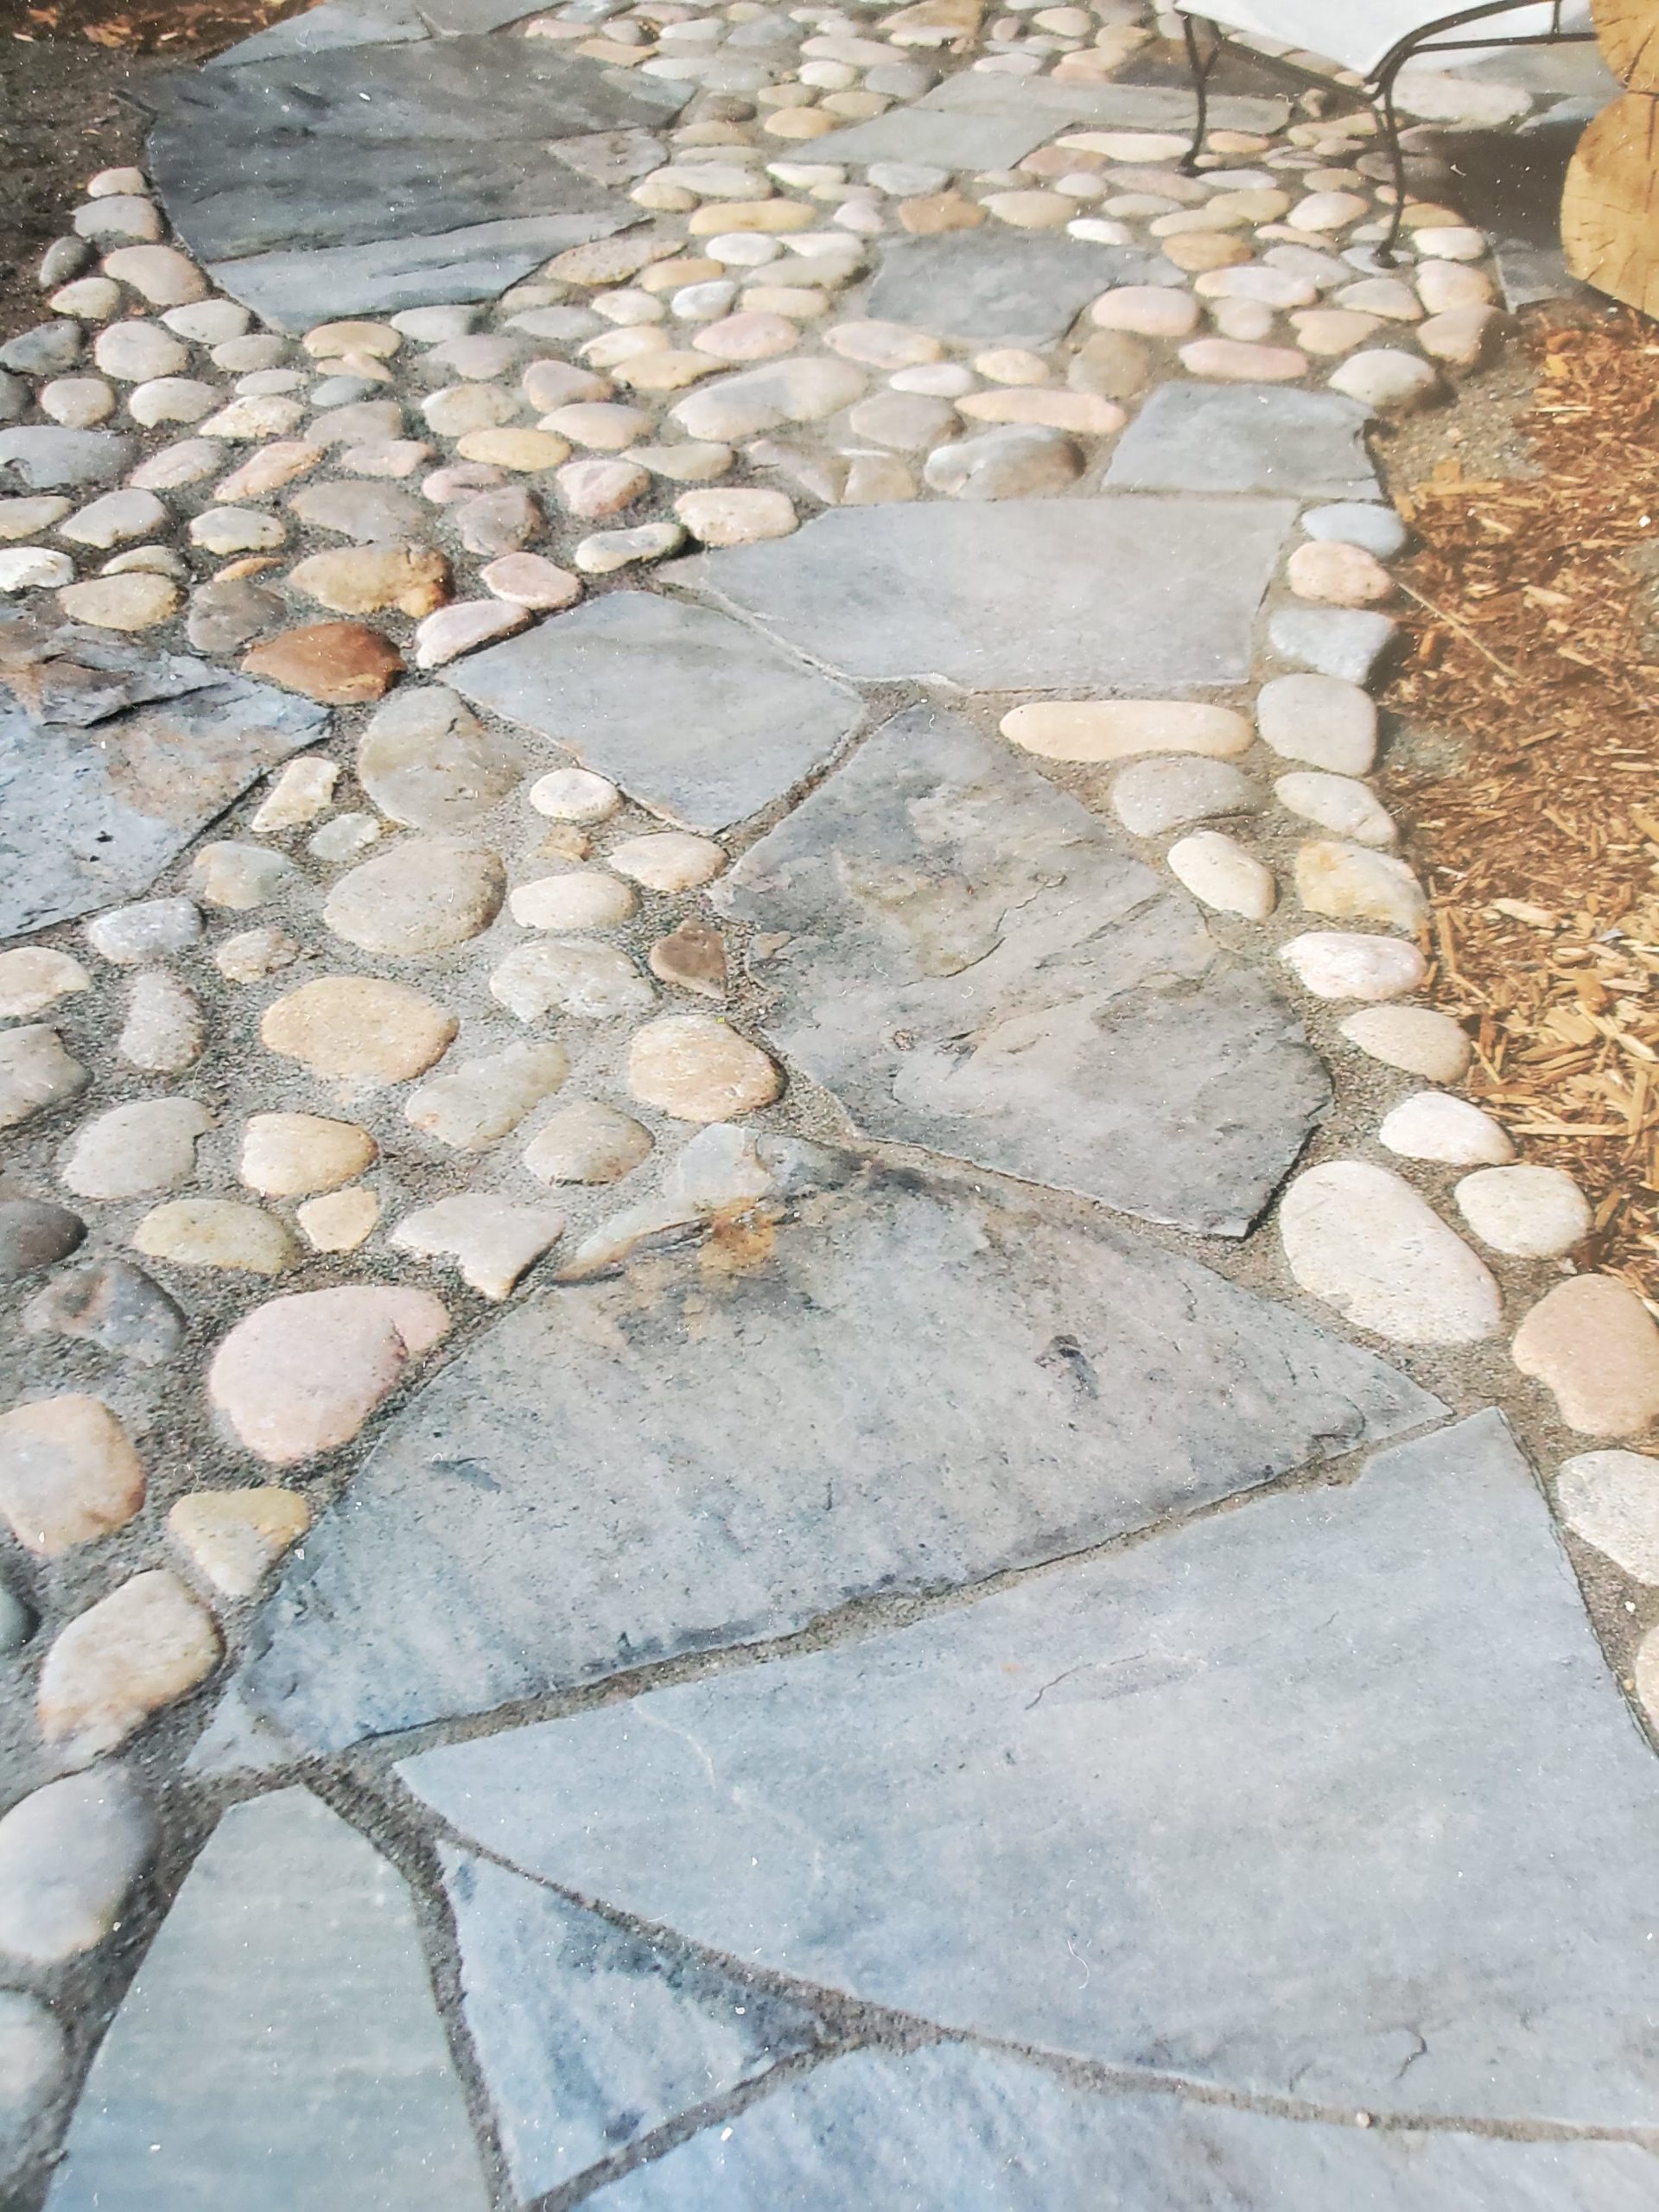 Large flat flagstone path with round river rocks interspersed.